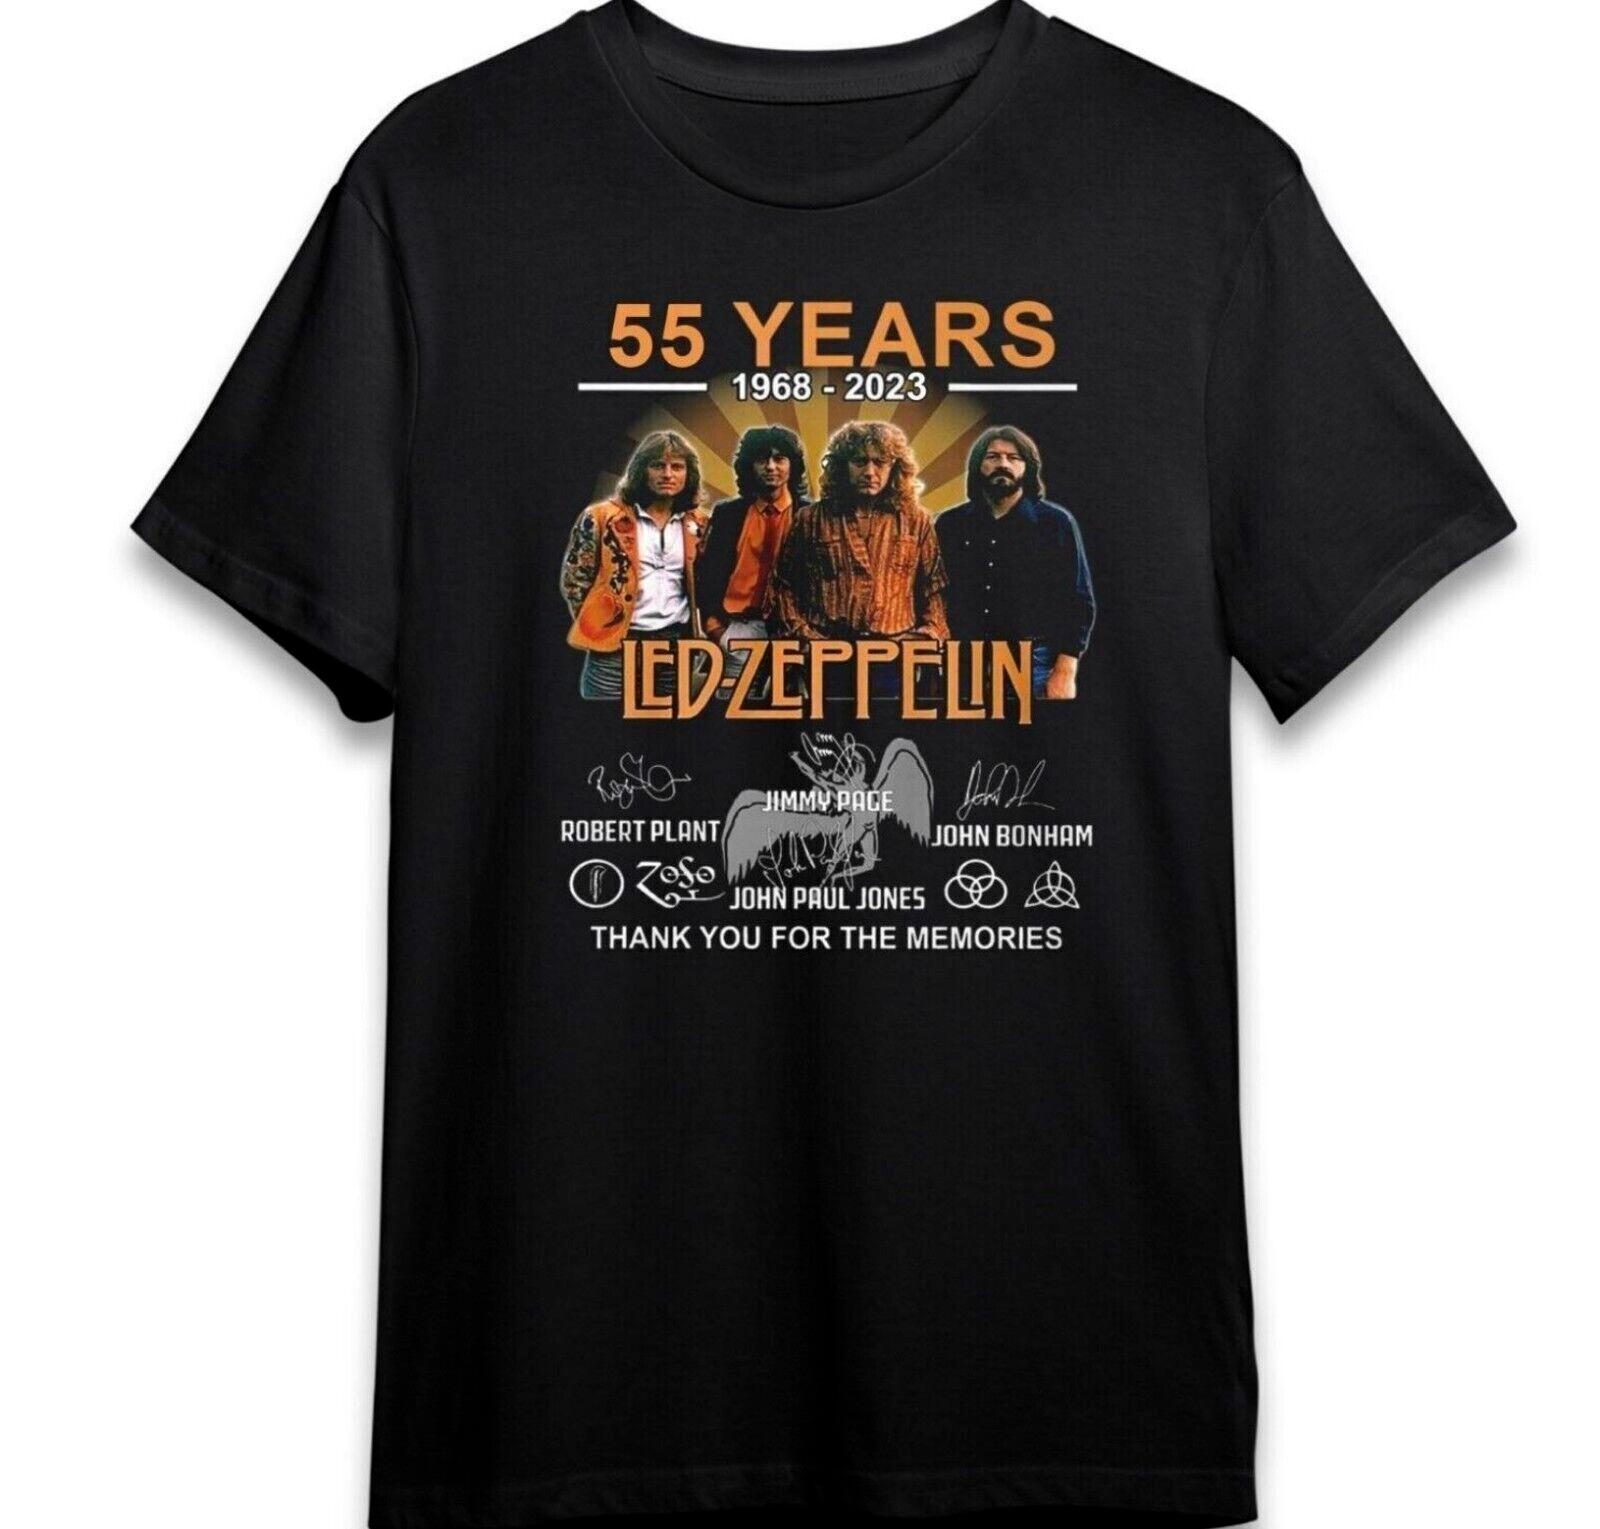 55 Years! Led Zeppelin 1968-2023 Thank You For Your Memories T-Shirt Unisex